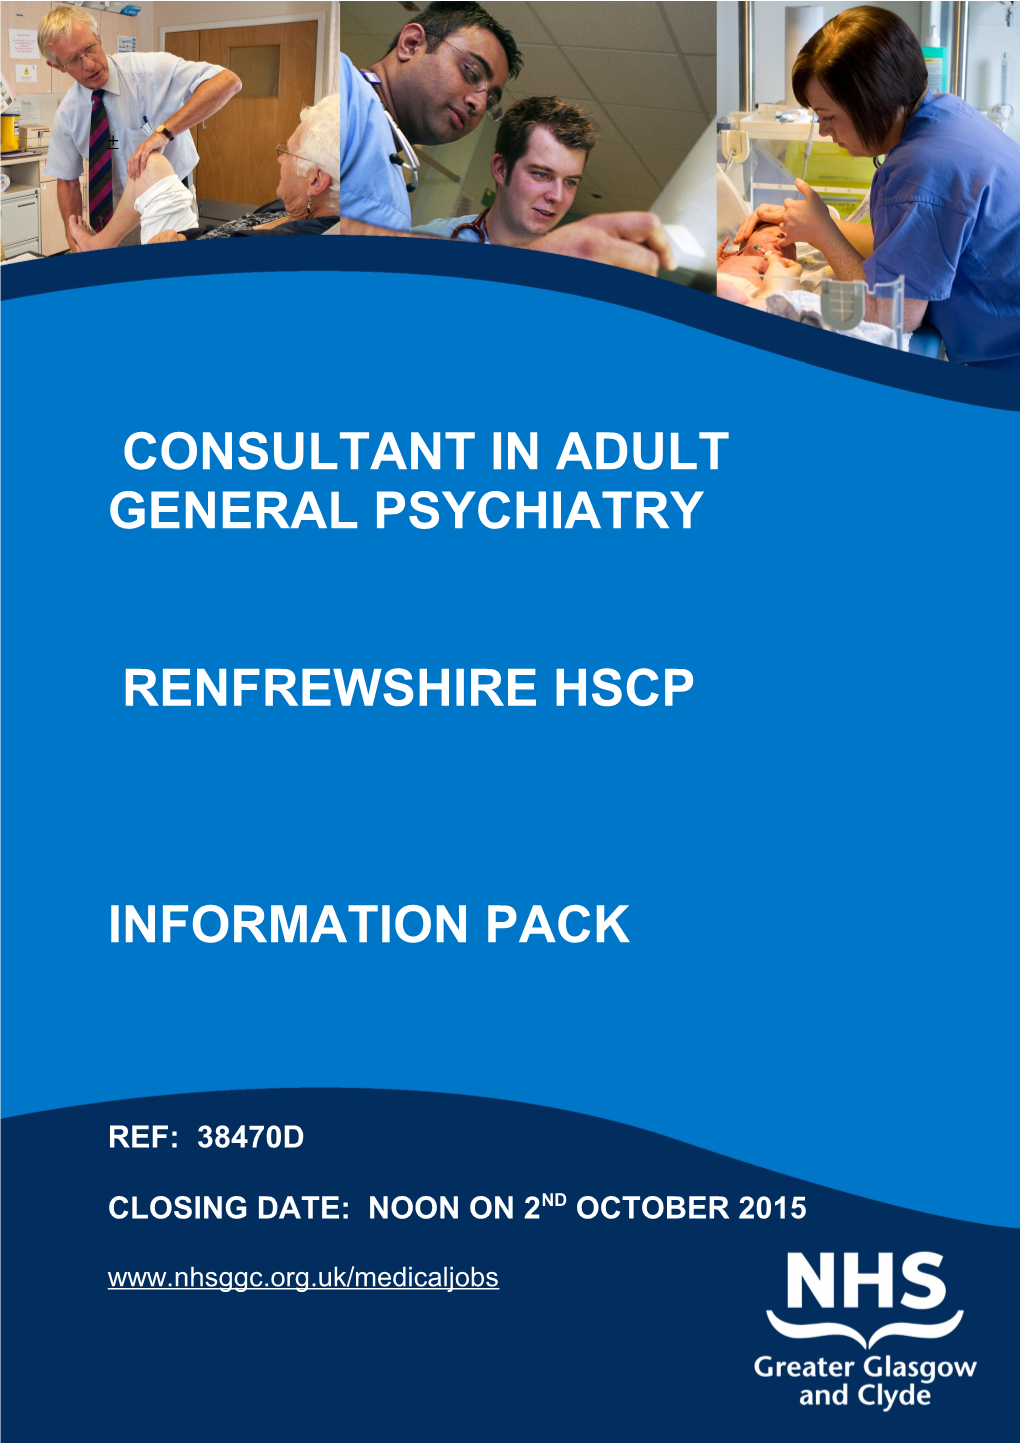 CONSULTANT in ADULT GENERAL Psychiatry